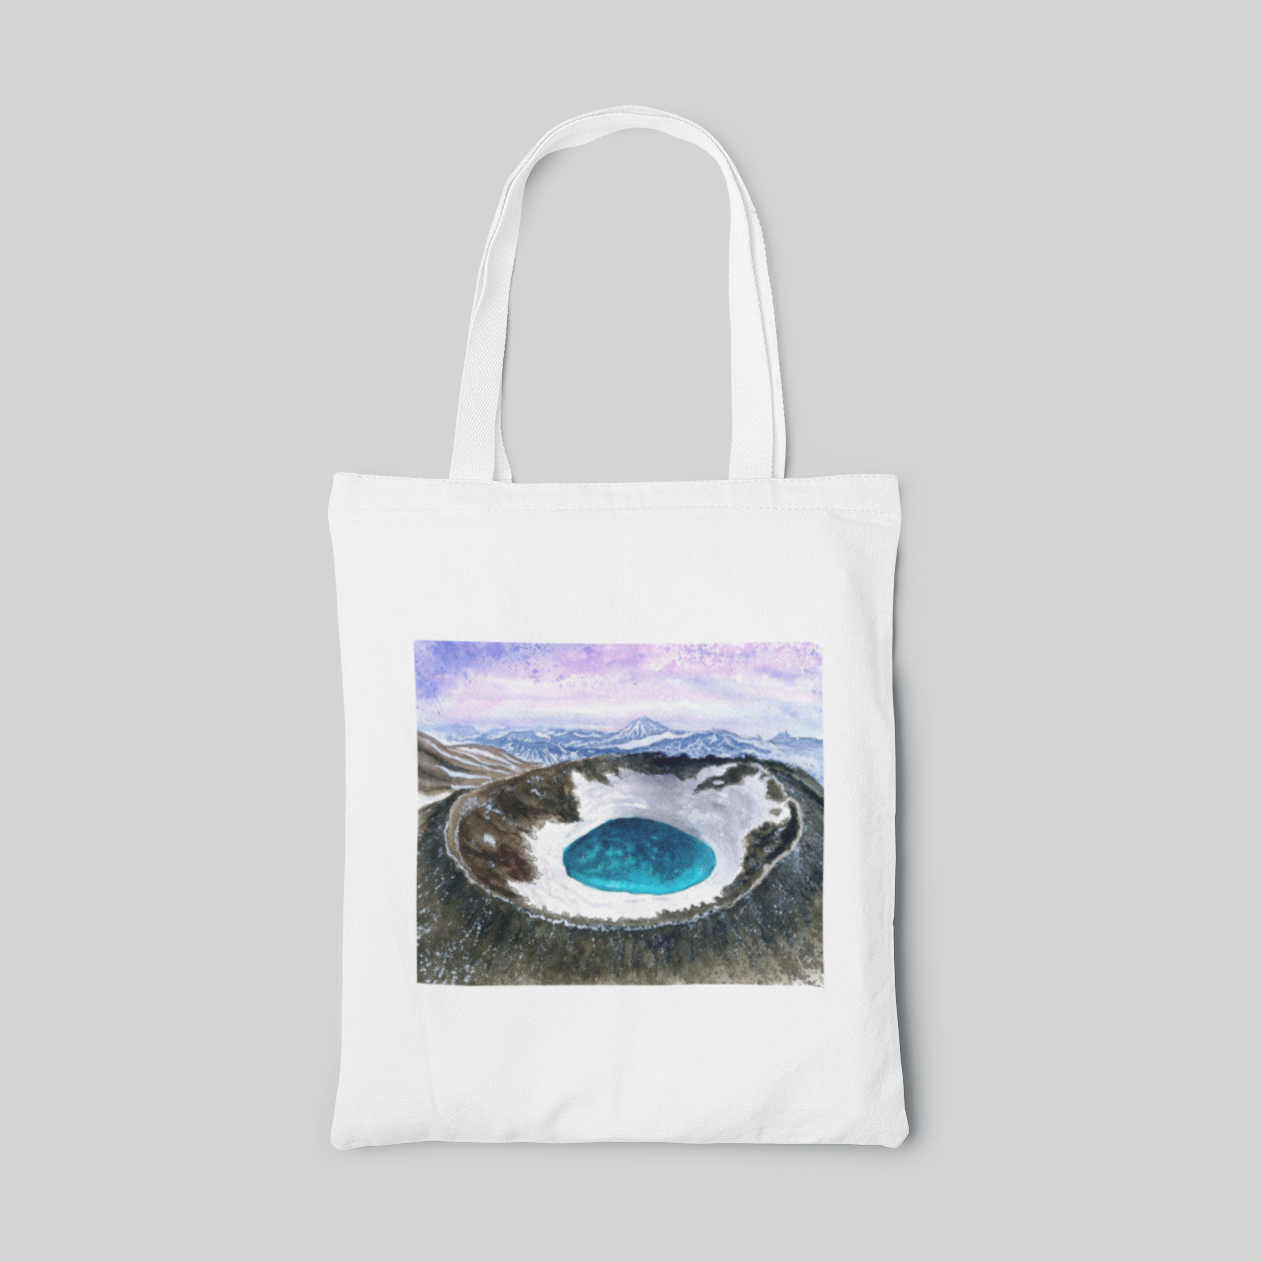 White tote bag with inside a volcano landscape 